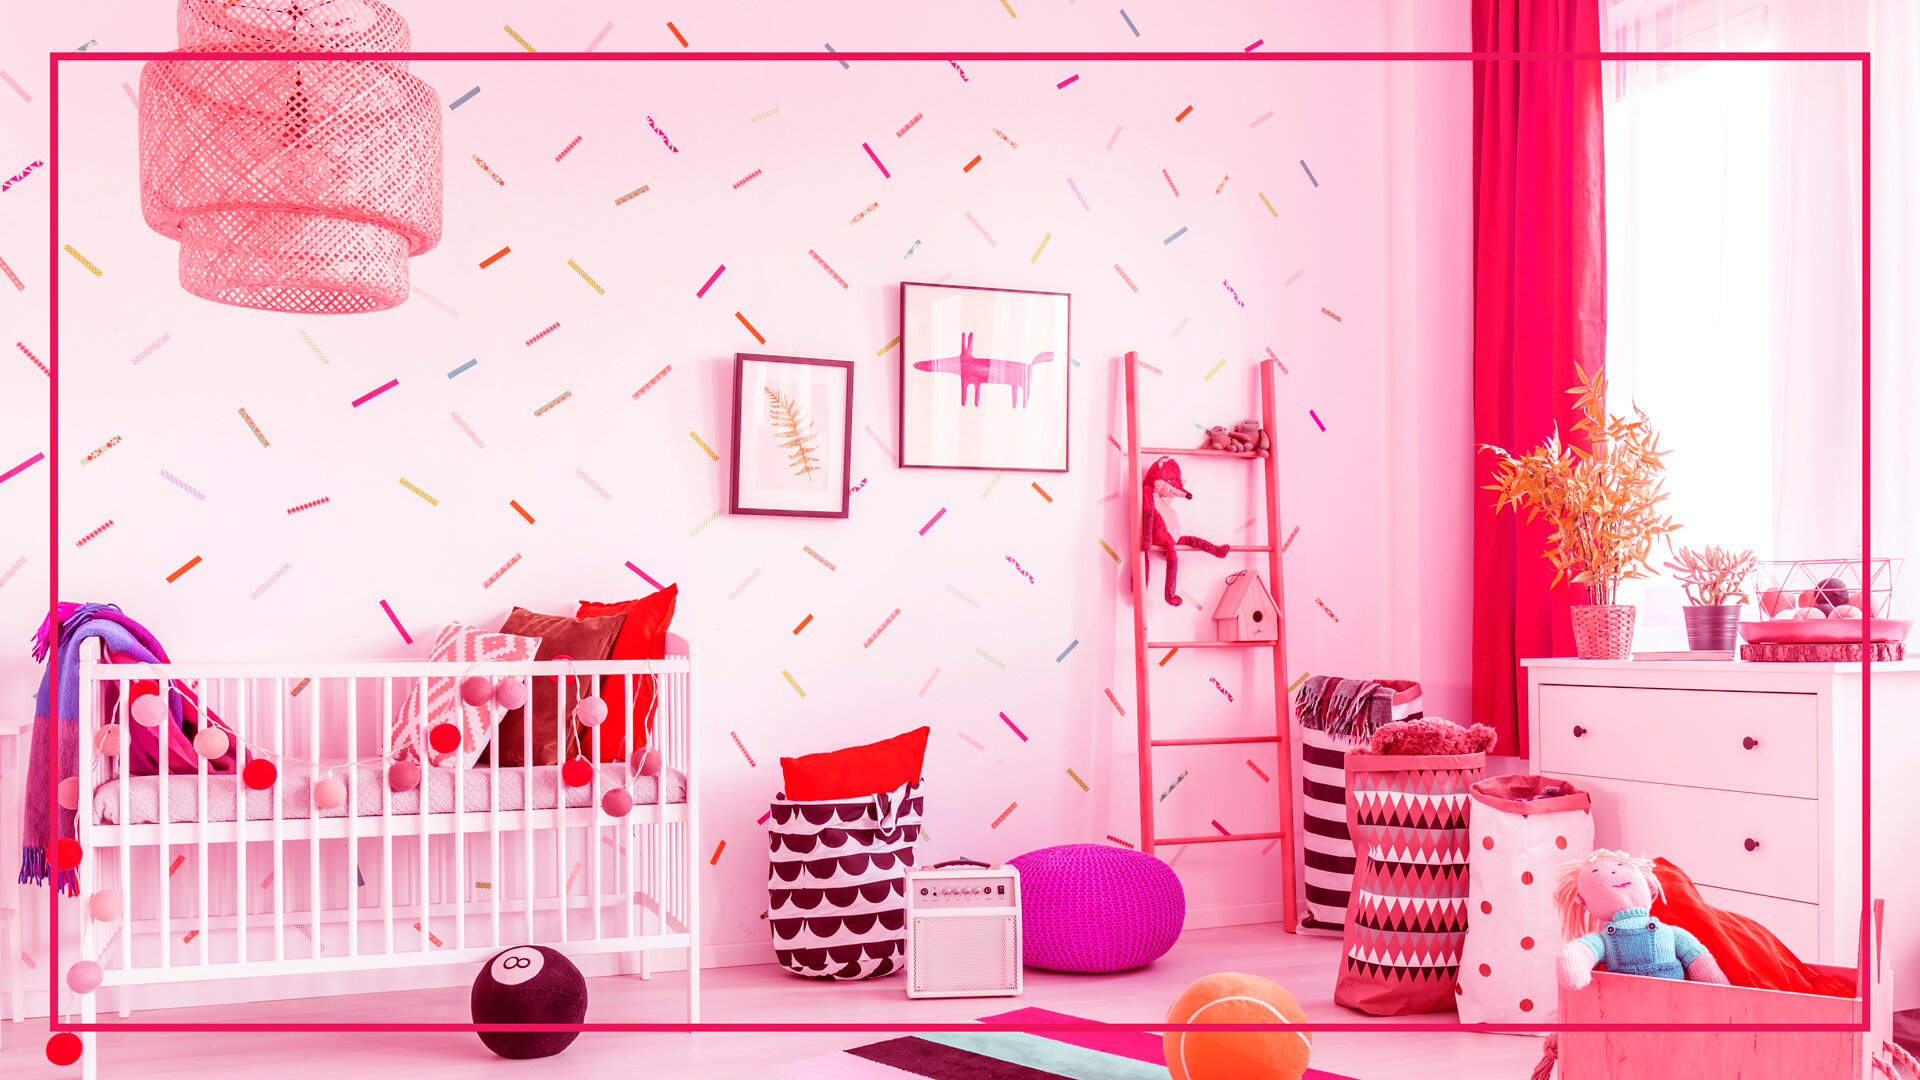  How to Design a Kids Room You Won’t Have to Totally Revamp Next Year 